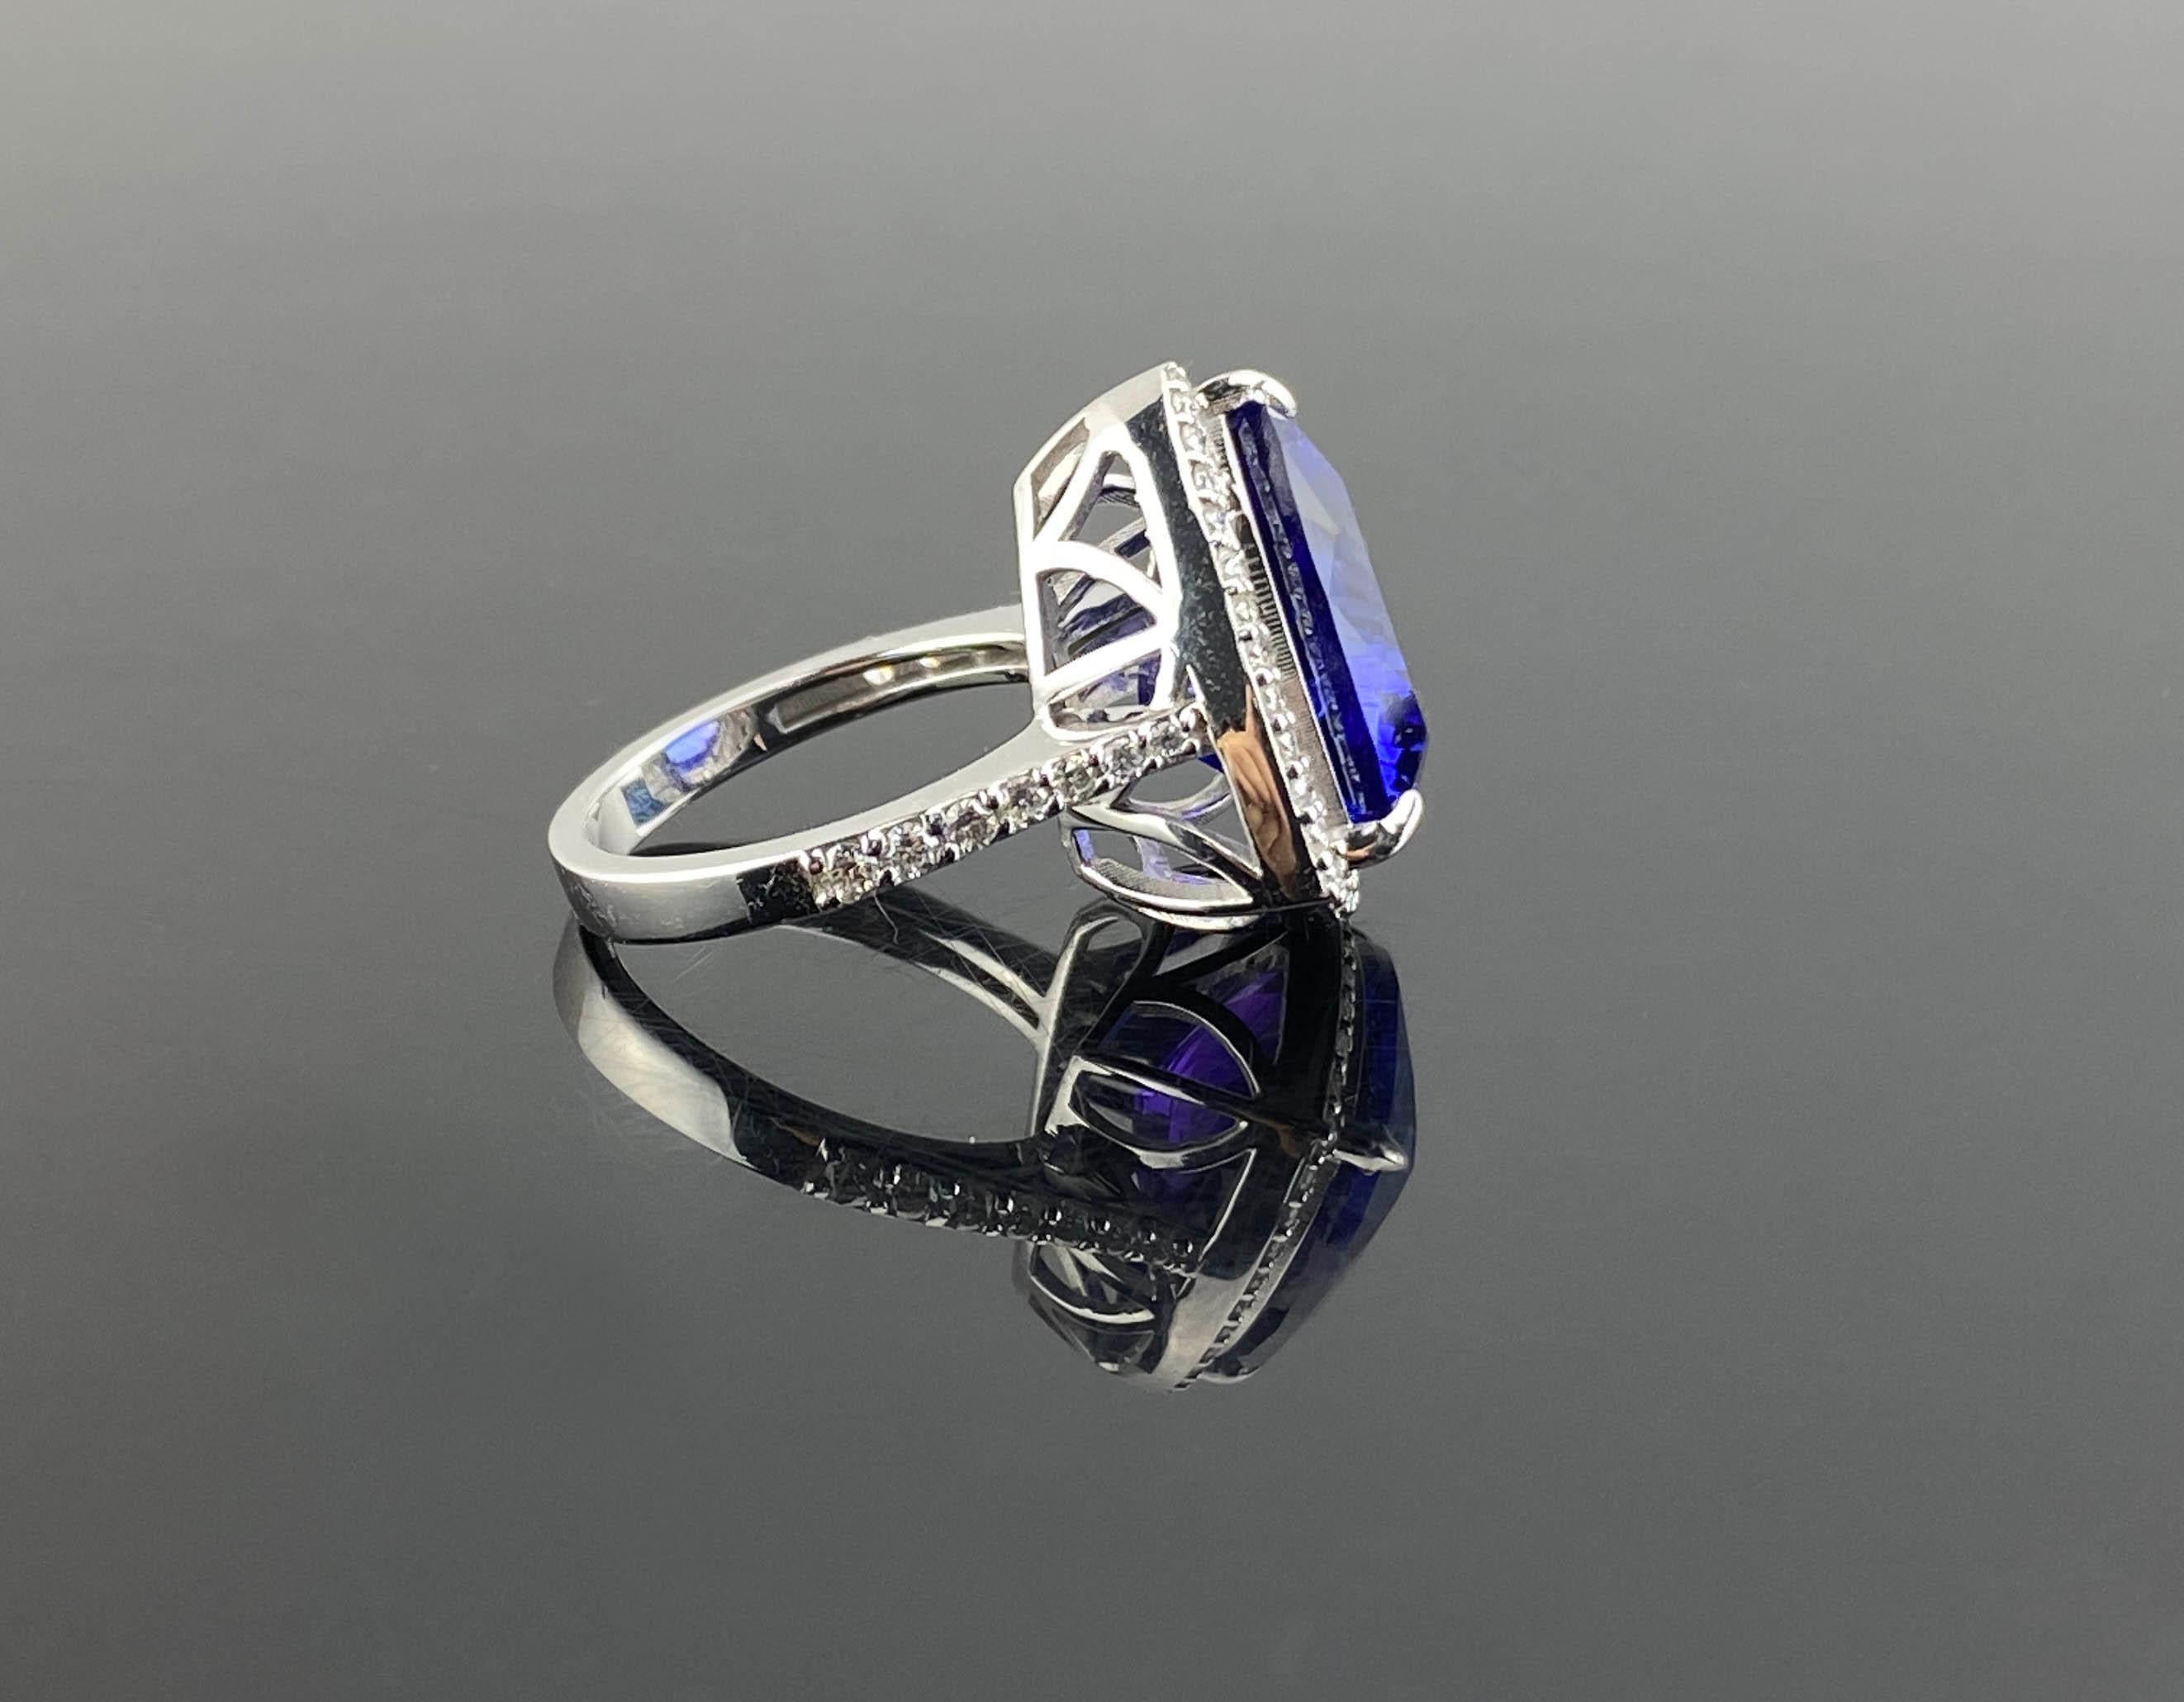 12.54 Carat Trillion Cut Tanzanite and Diamond Cocktail Ring Set in White Gold In New Condition For Sale In Bangkok, Thailand